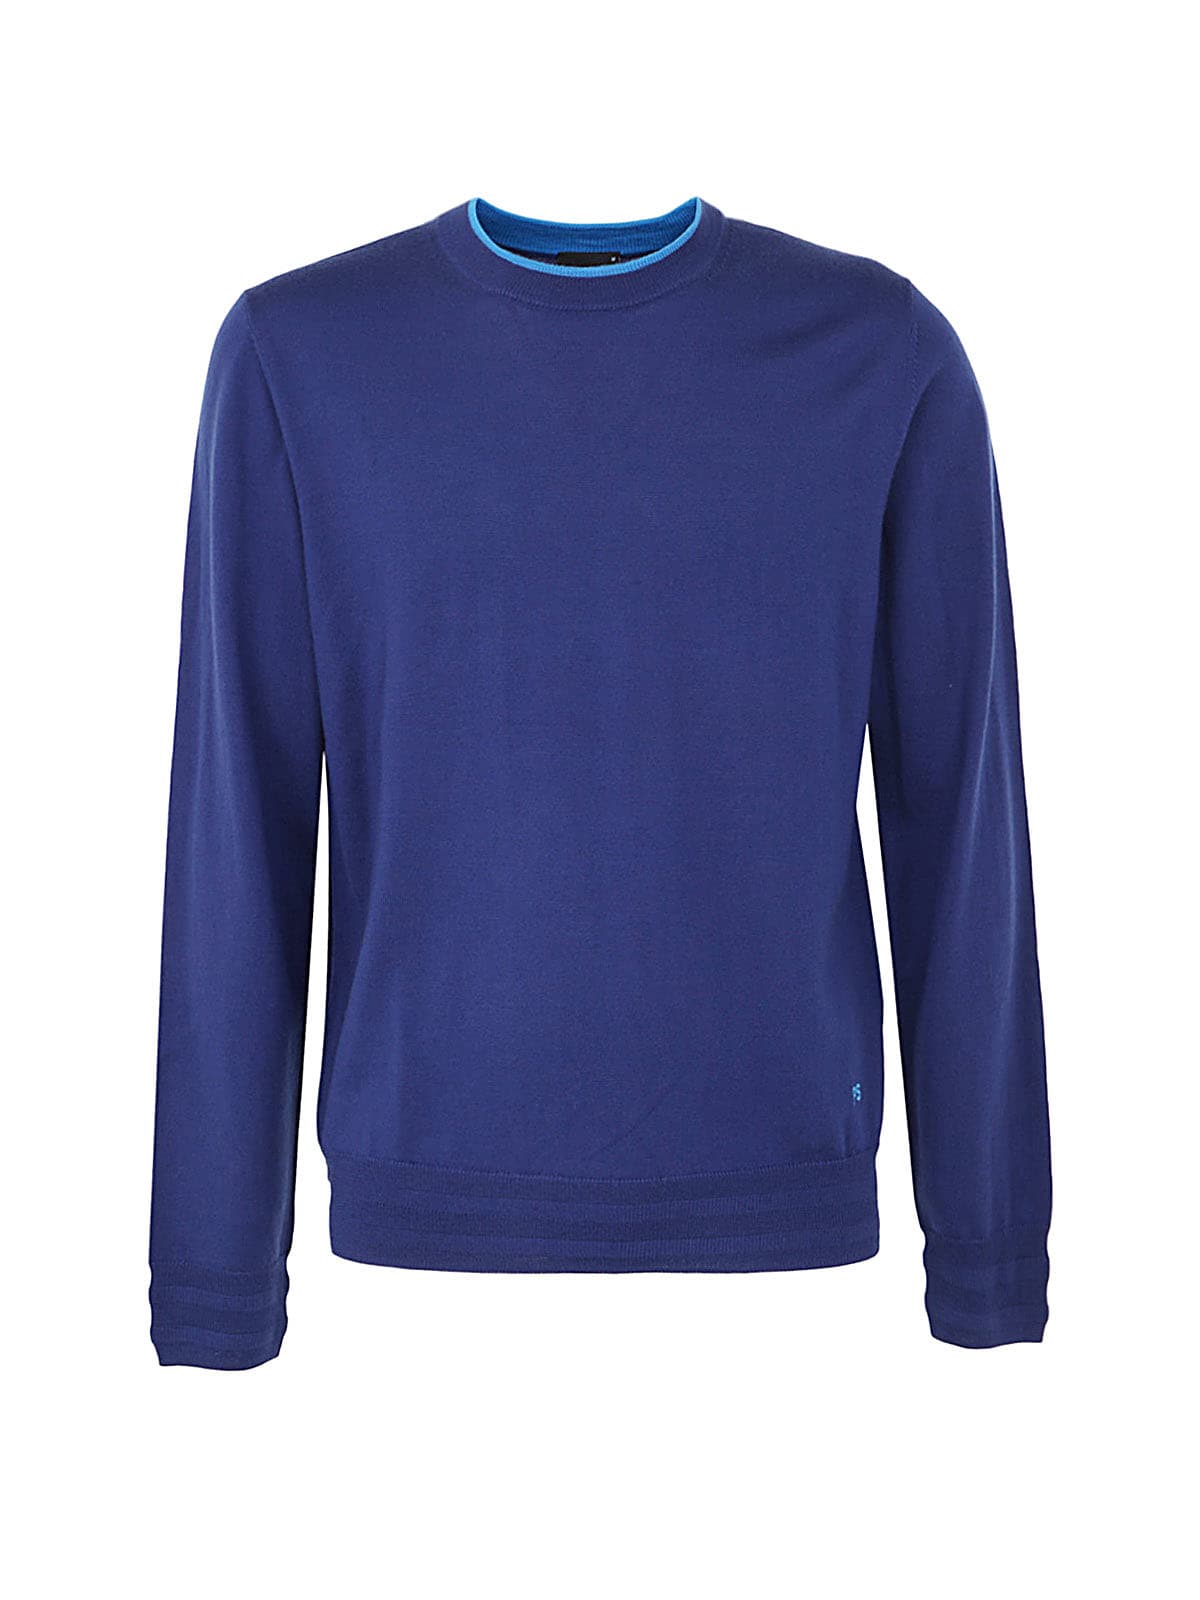 PS by Paul Smith Mens Pullover Crew Neck